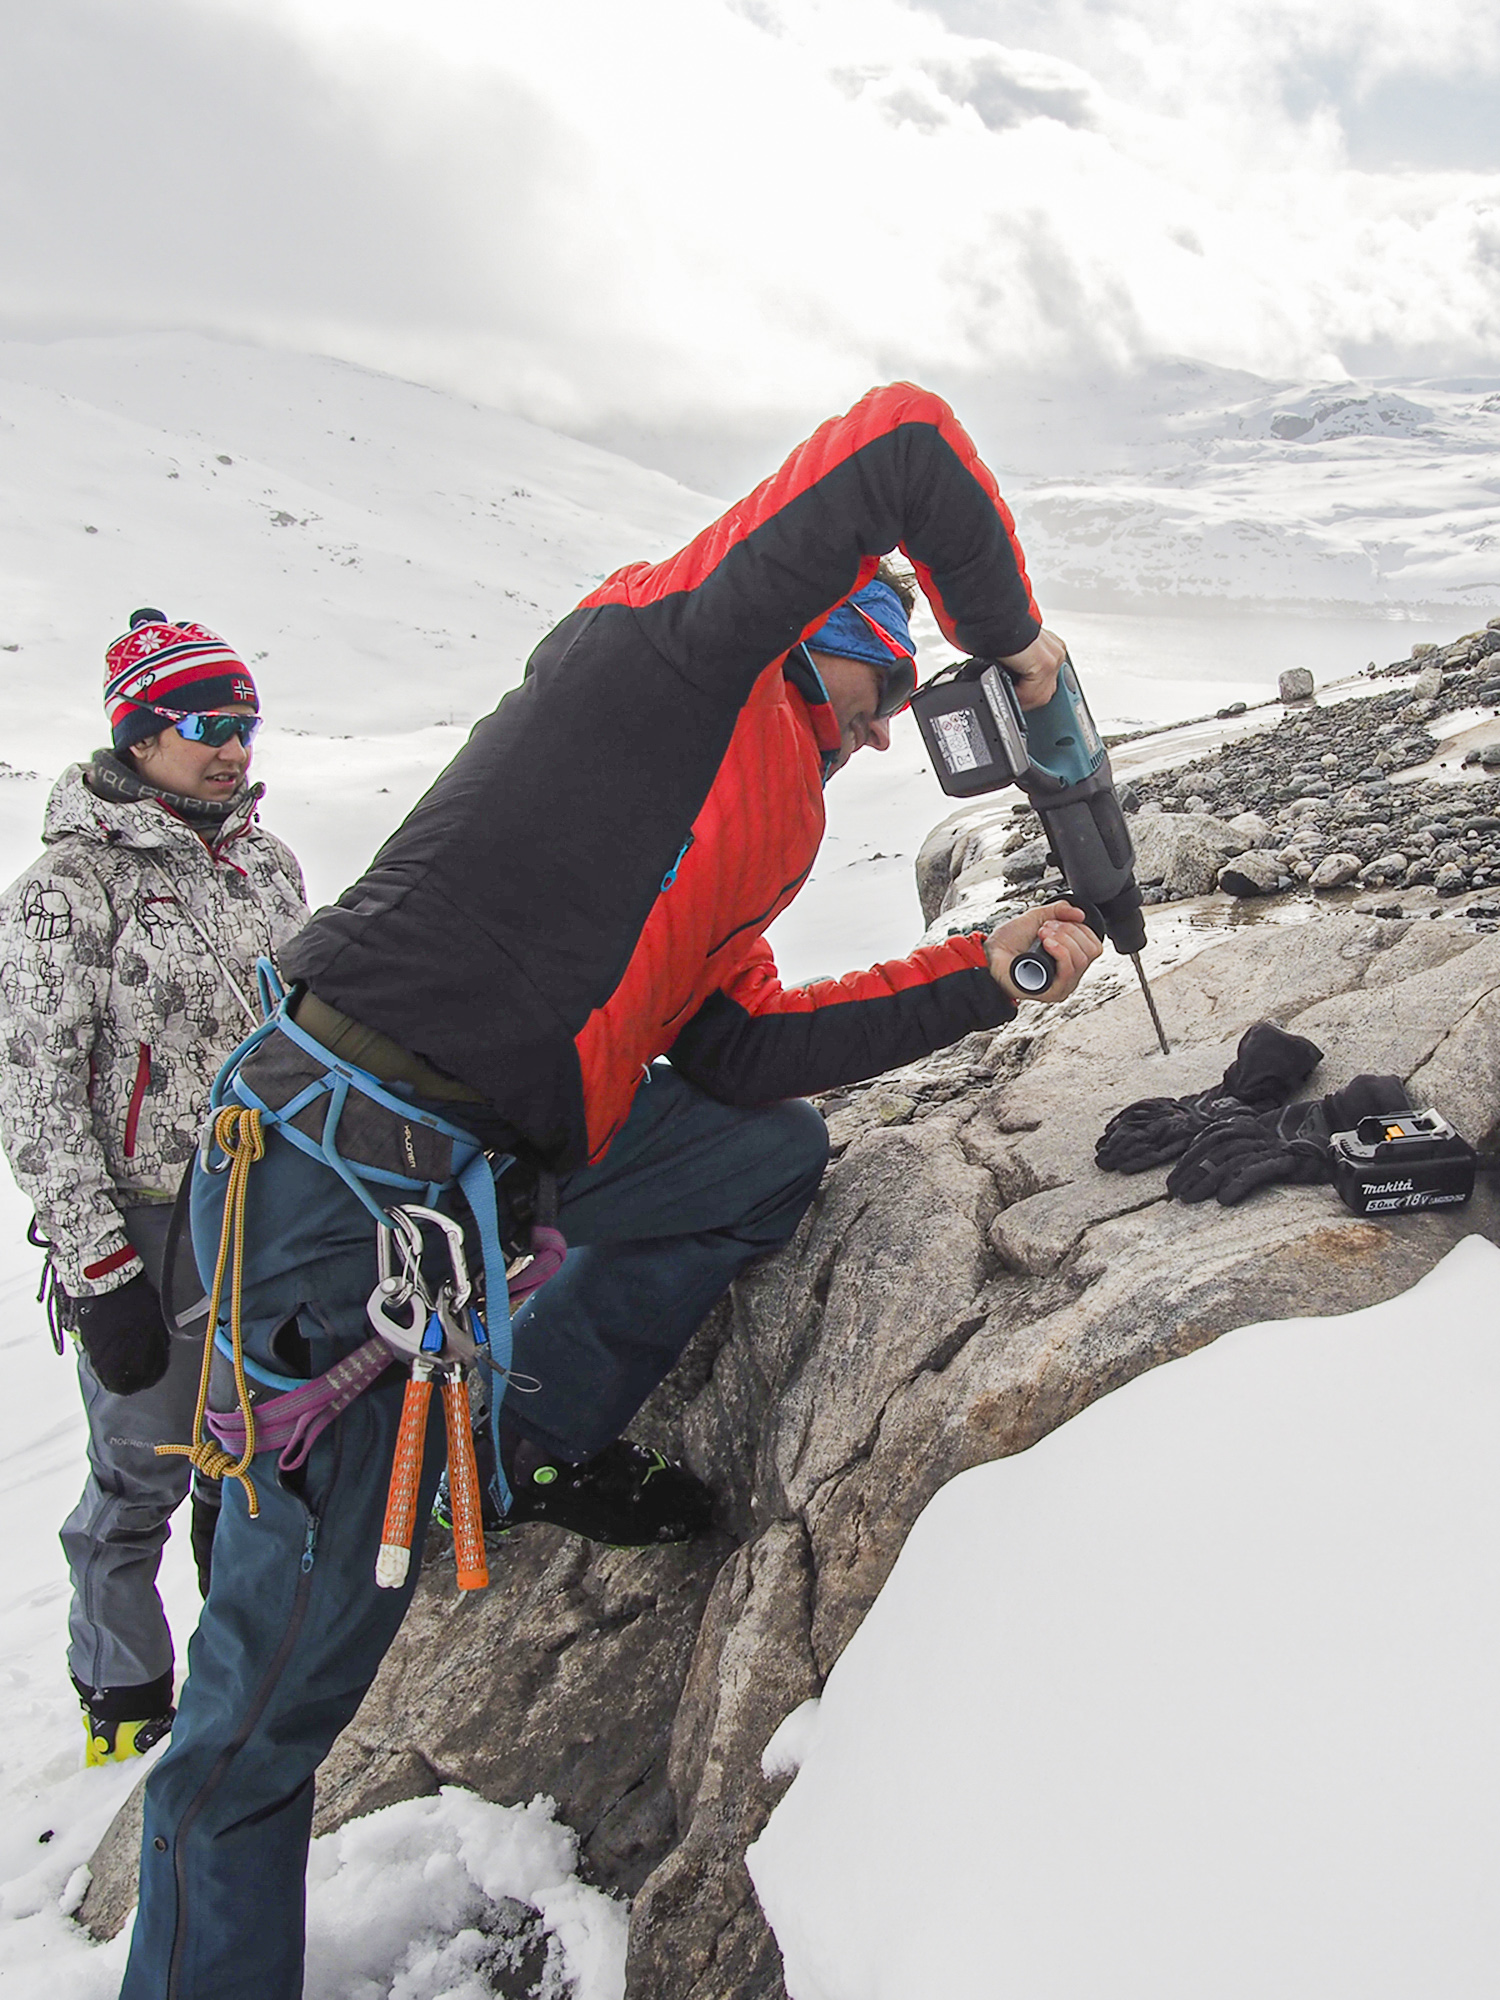 A group of researchers wants to help communities living close to melting glaciers. Photo shows scientists mounting equipment on a rock.